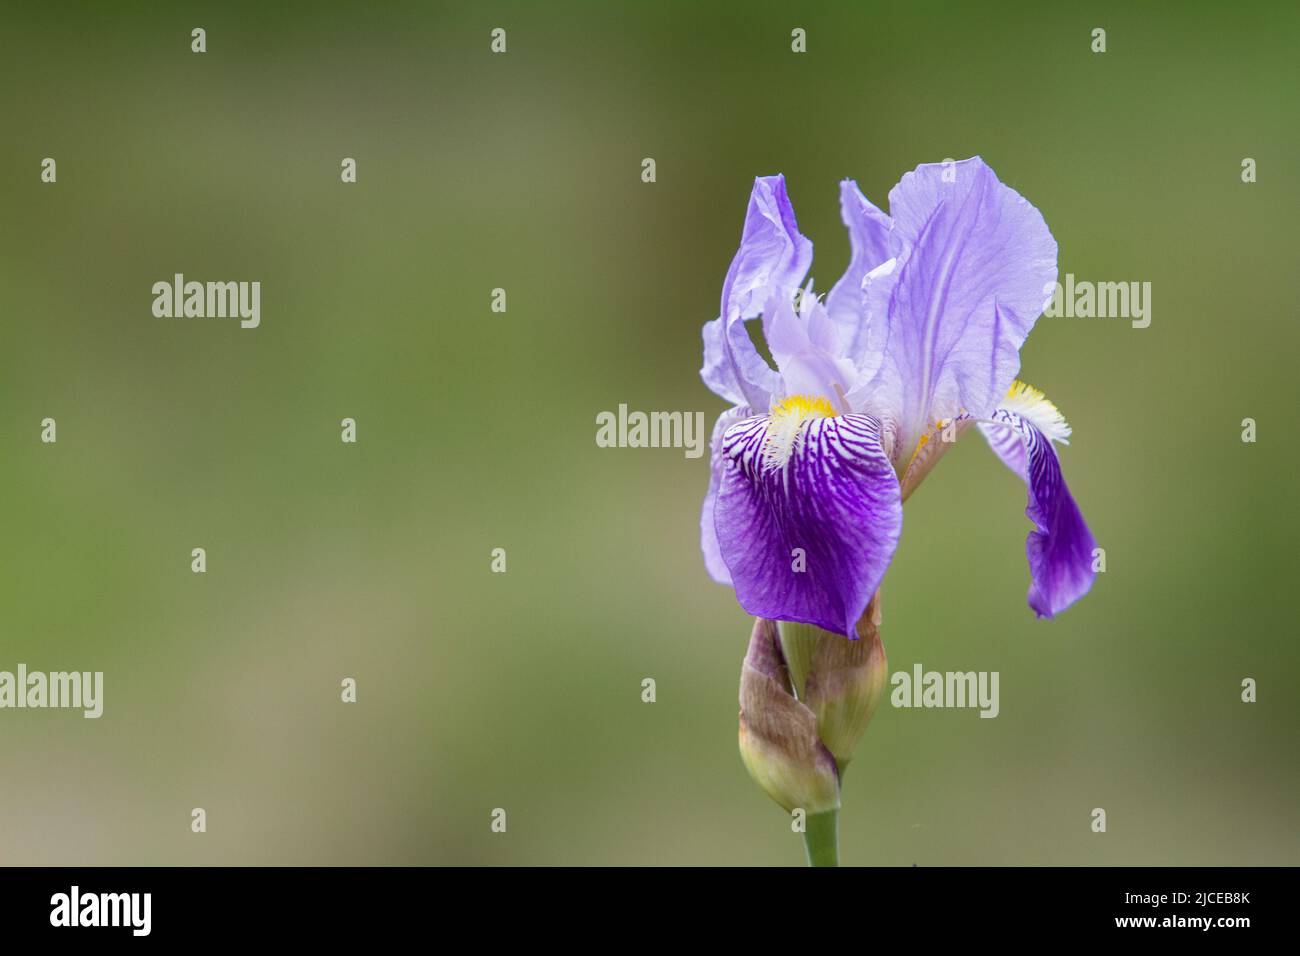 Purple and lavender Hybrid Bearded Iris in a late spring garden with a soft focus green background providing lots of copy space. Stock Photo